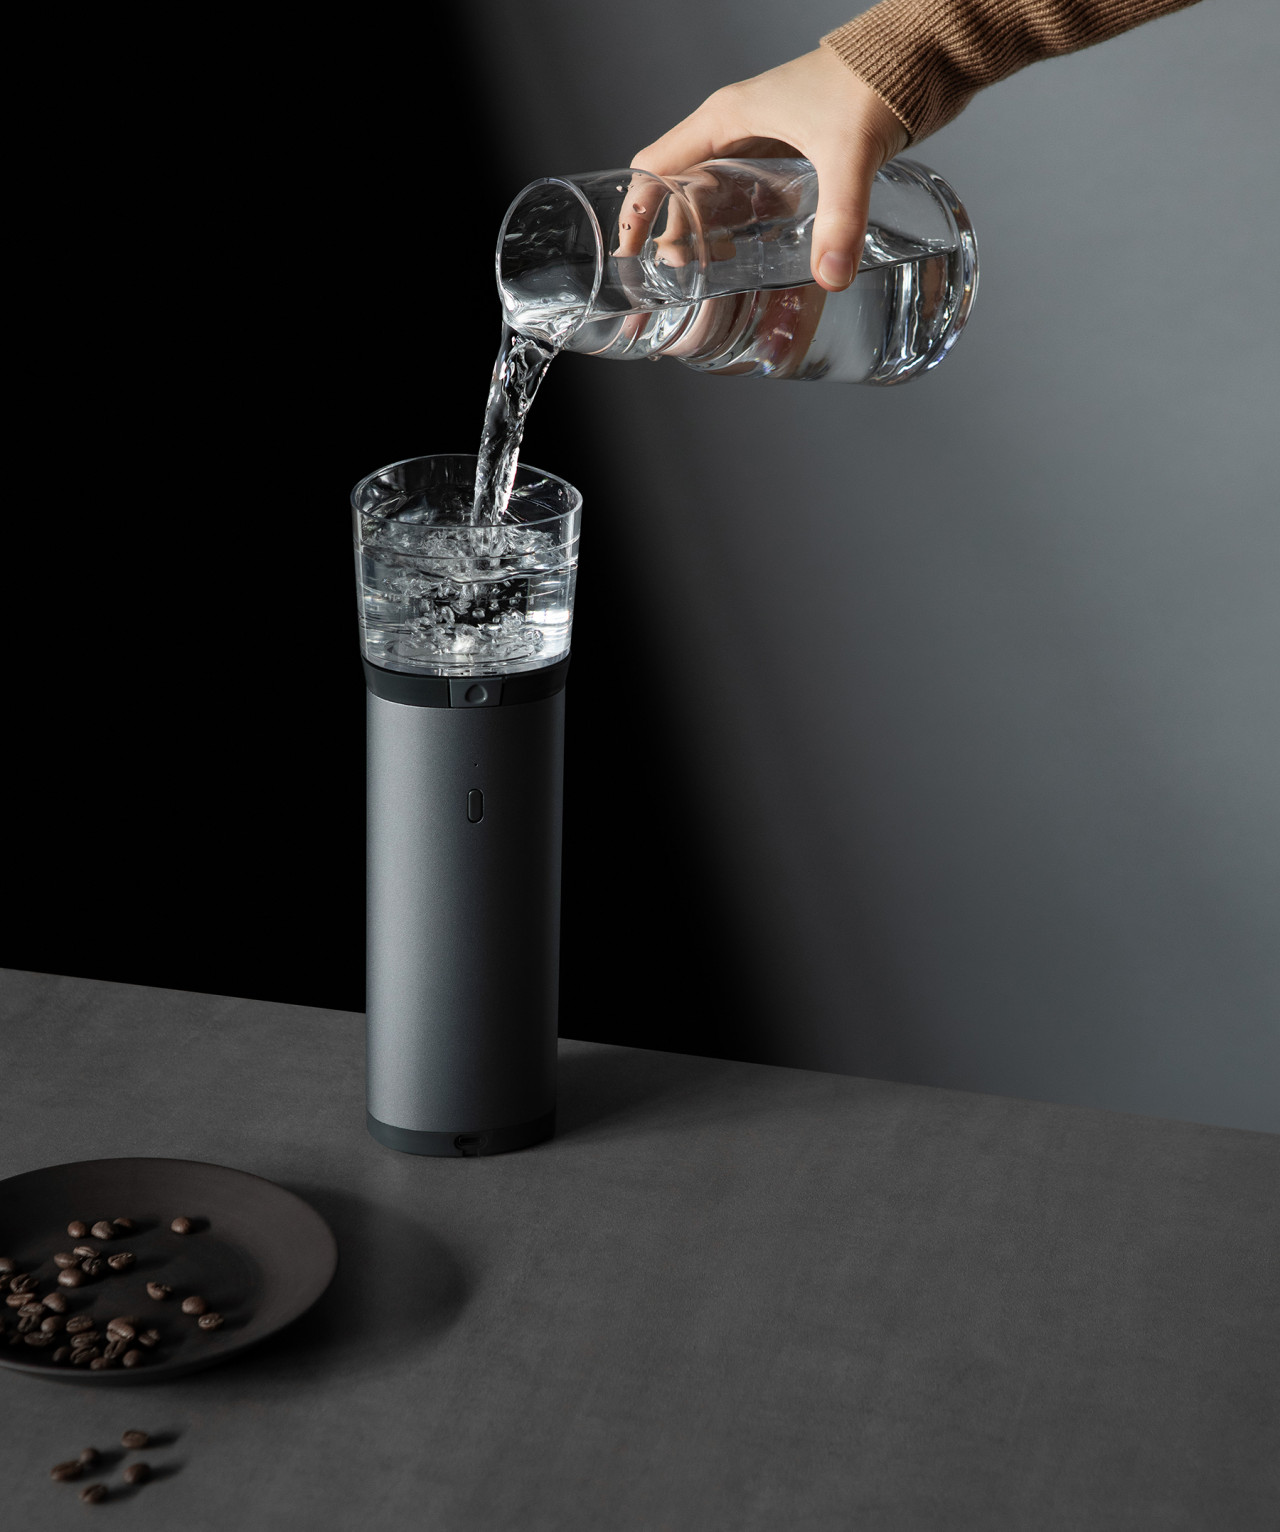 Osma's Sleek Coffee Maker Creates Complex Cold Brew in Just 90 Seconds –  Robb Report